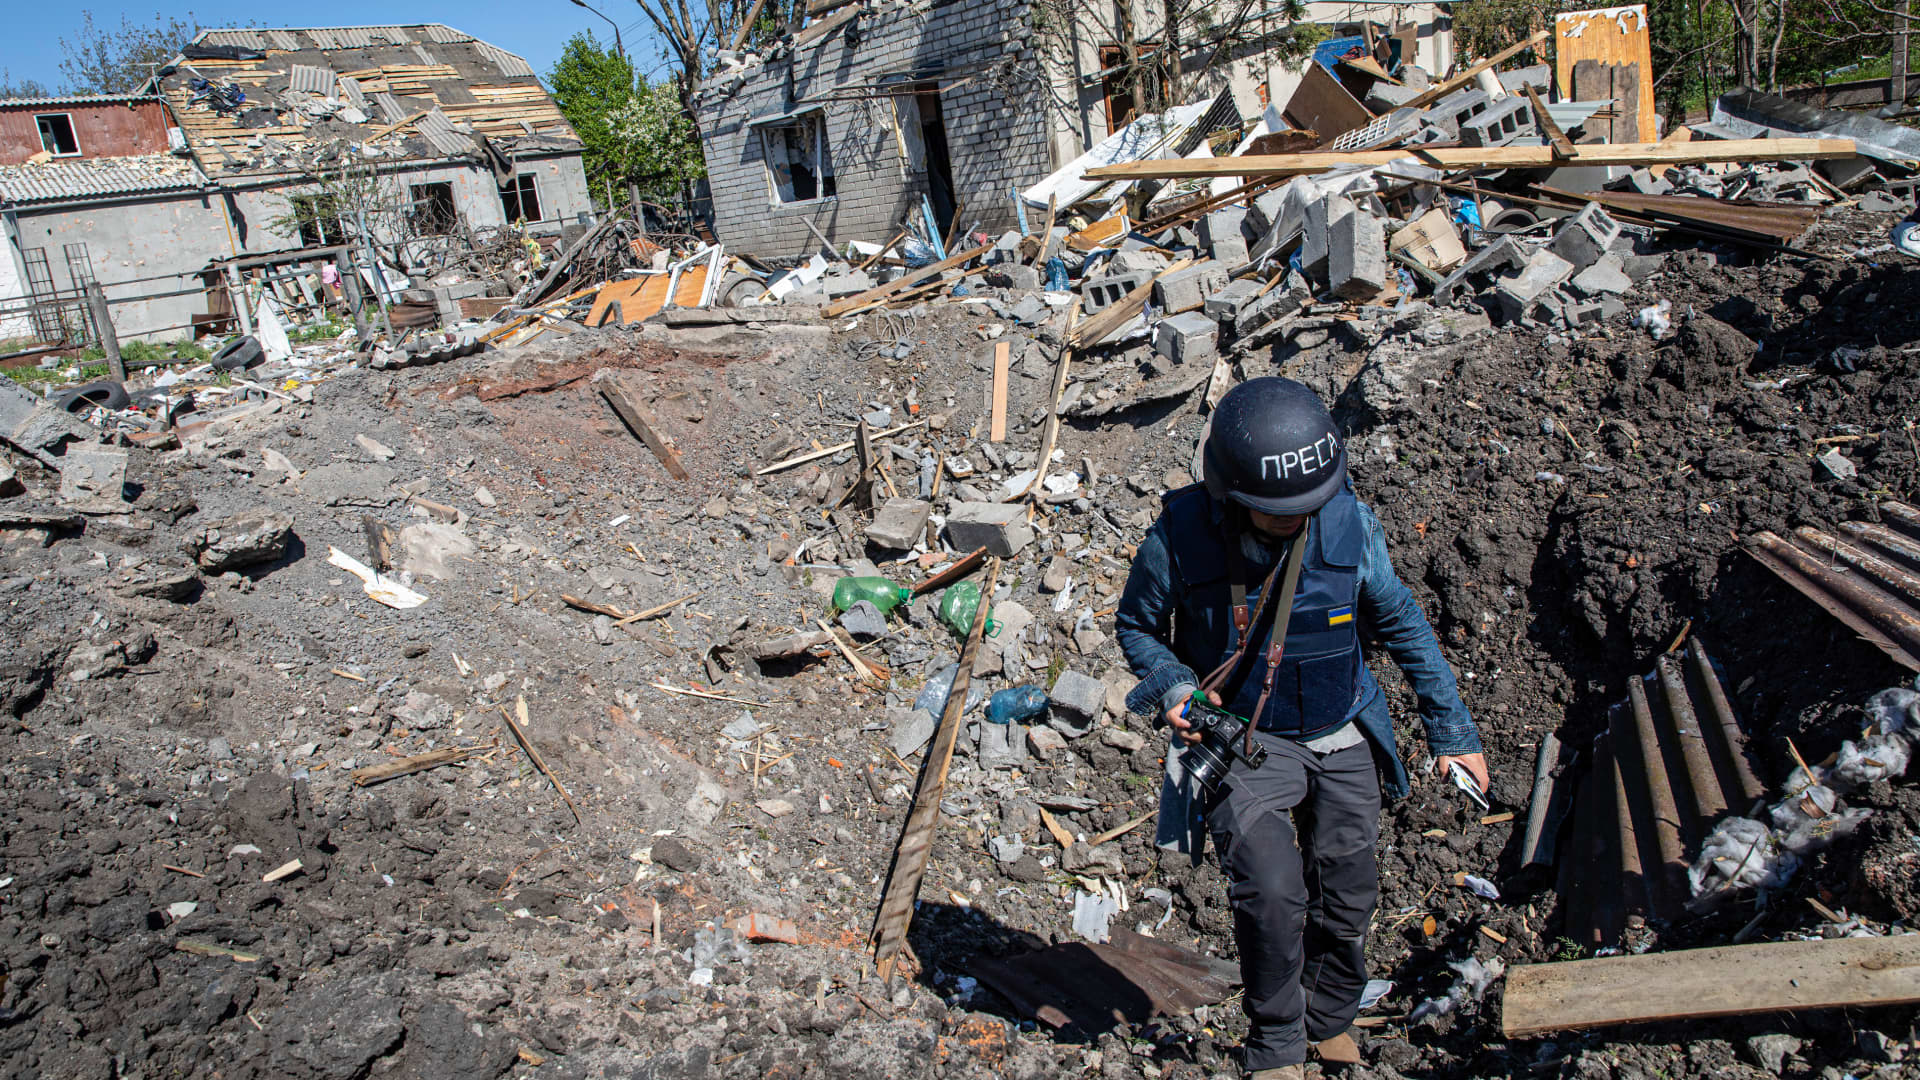 A journalist climbs out of a crater caused by a Russian missile strike in Ukraine. Ukrainian President Volodymyr Zelenskyy says 32 media representatives have been killed since Russia invaded Ukraine on Feb. 24.